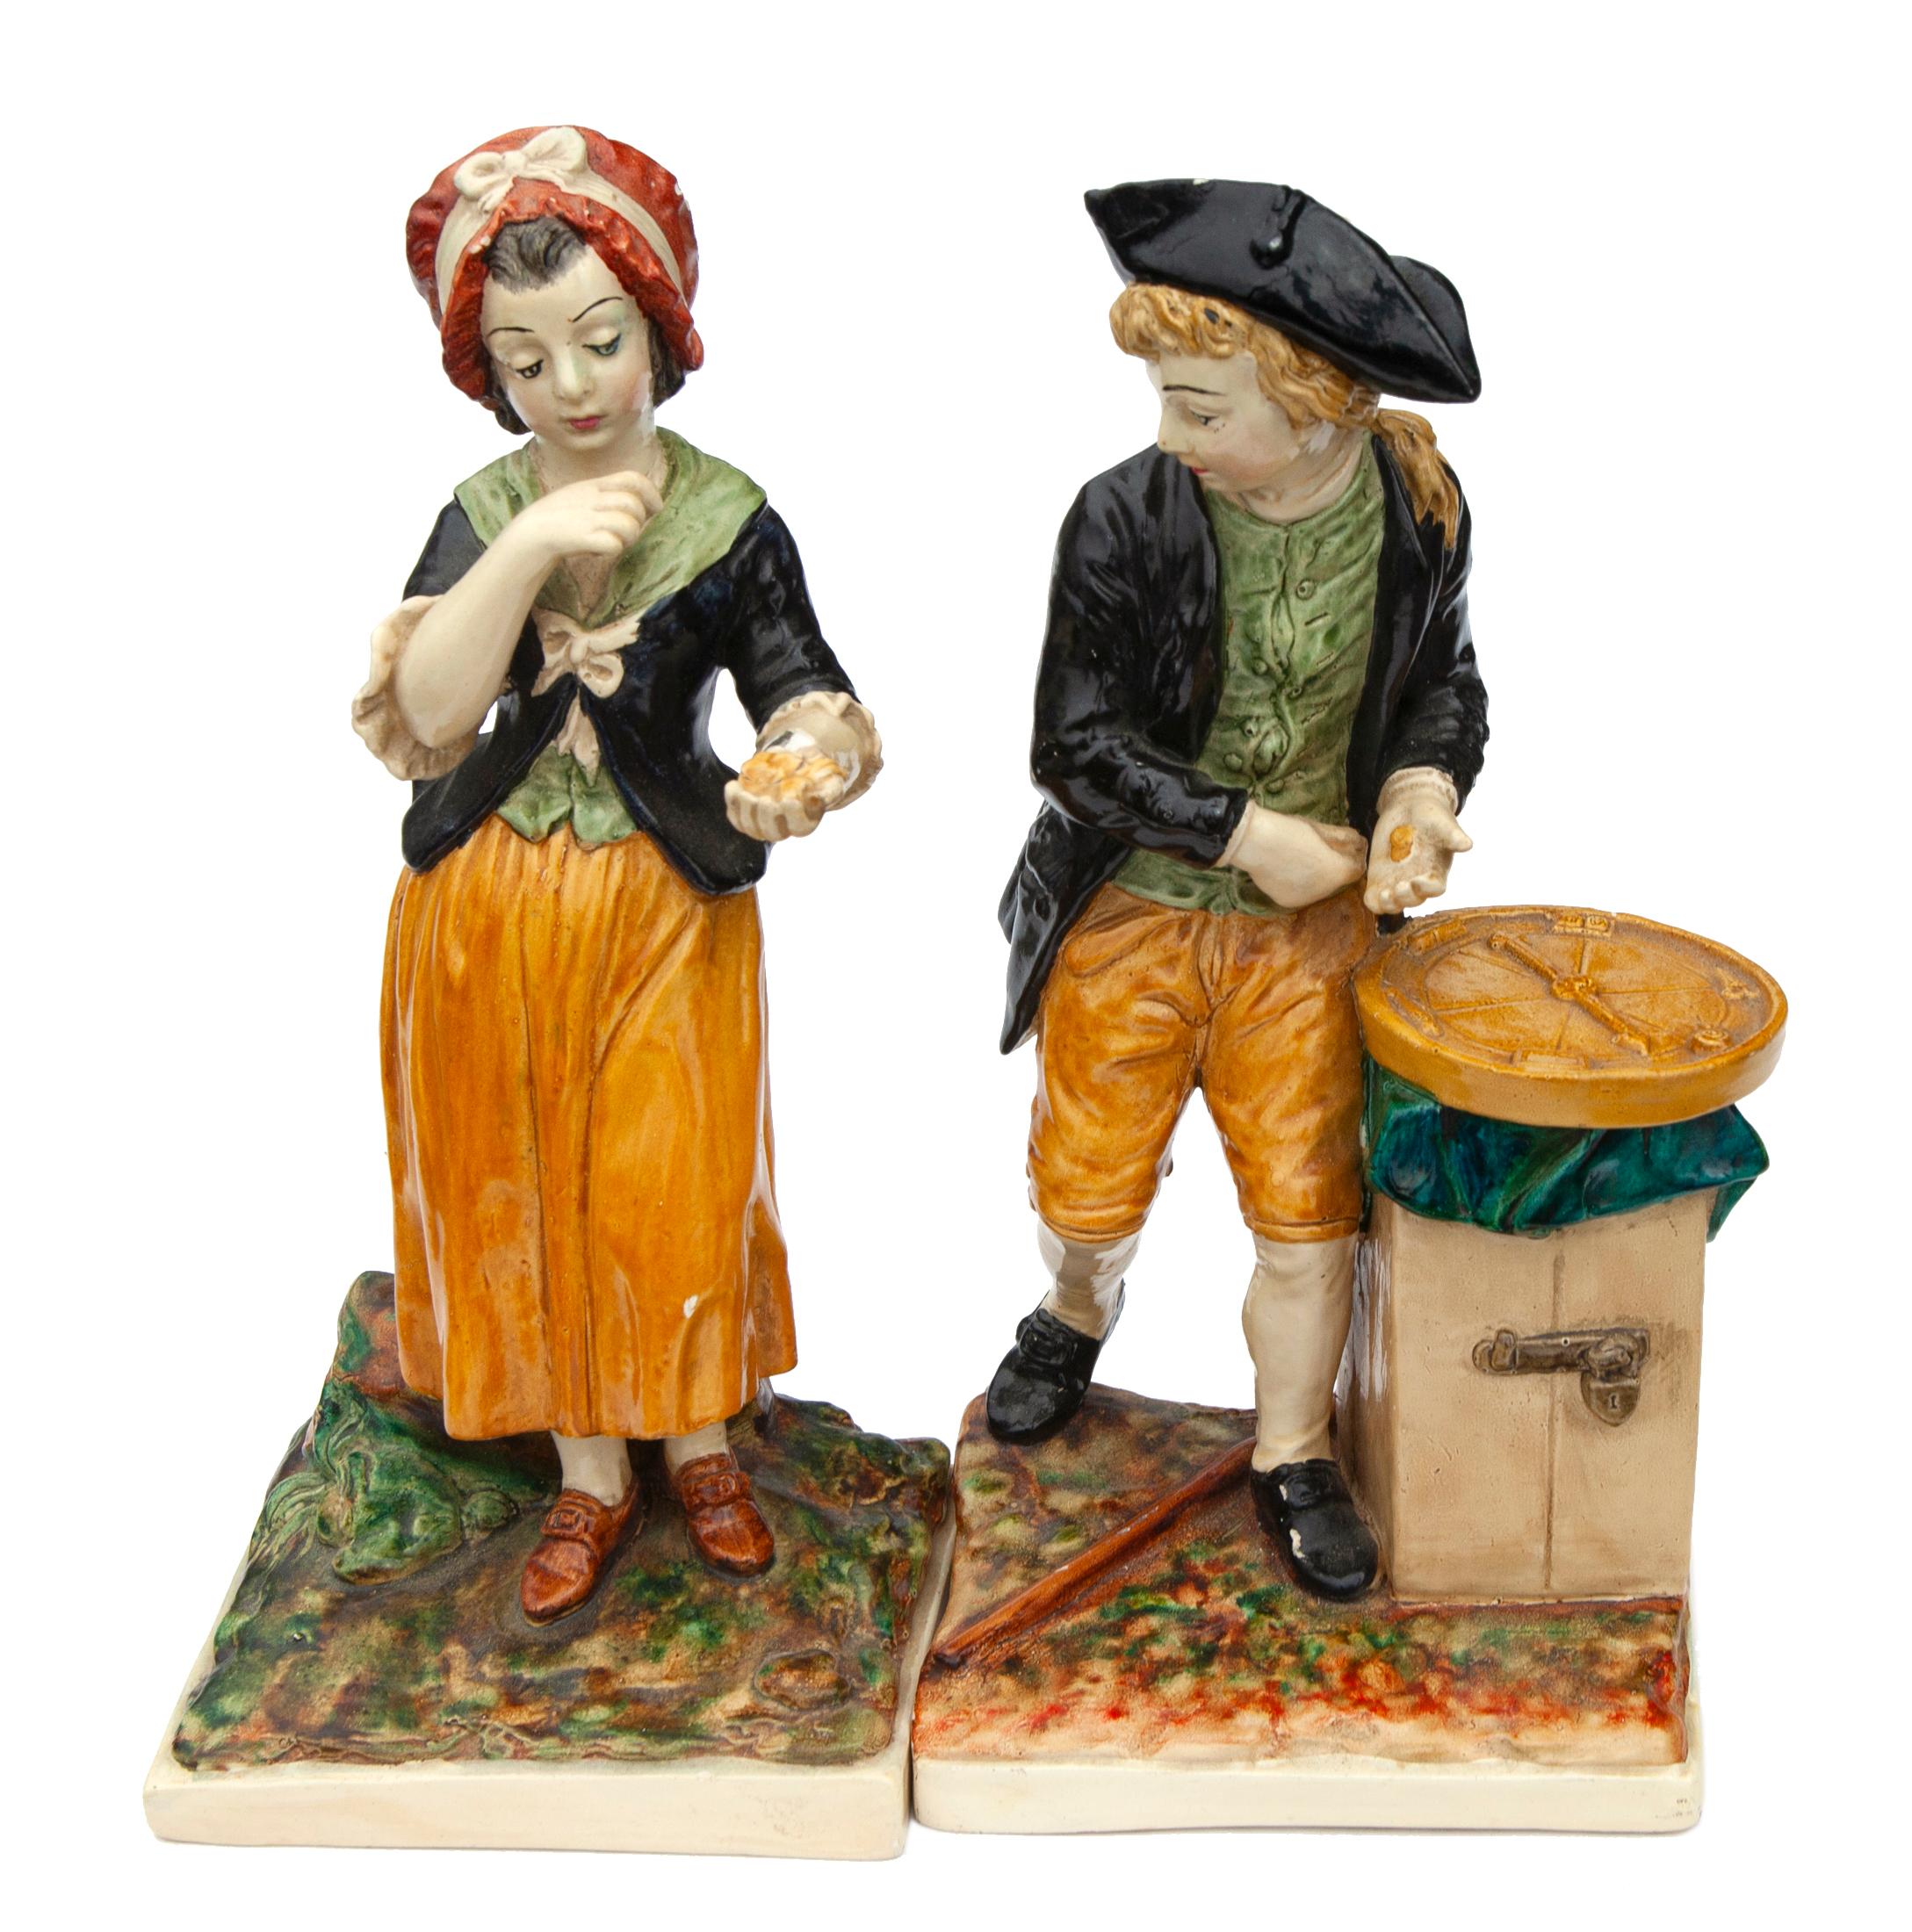 Vintage Niepold Borghese chalkware figurines of a man & woman traveling pair.
 